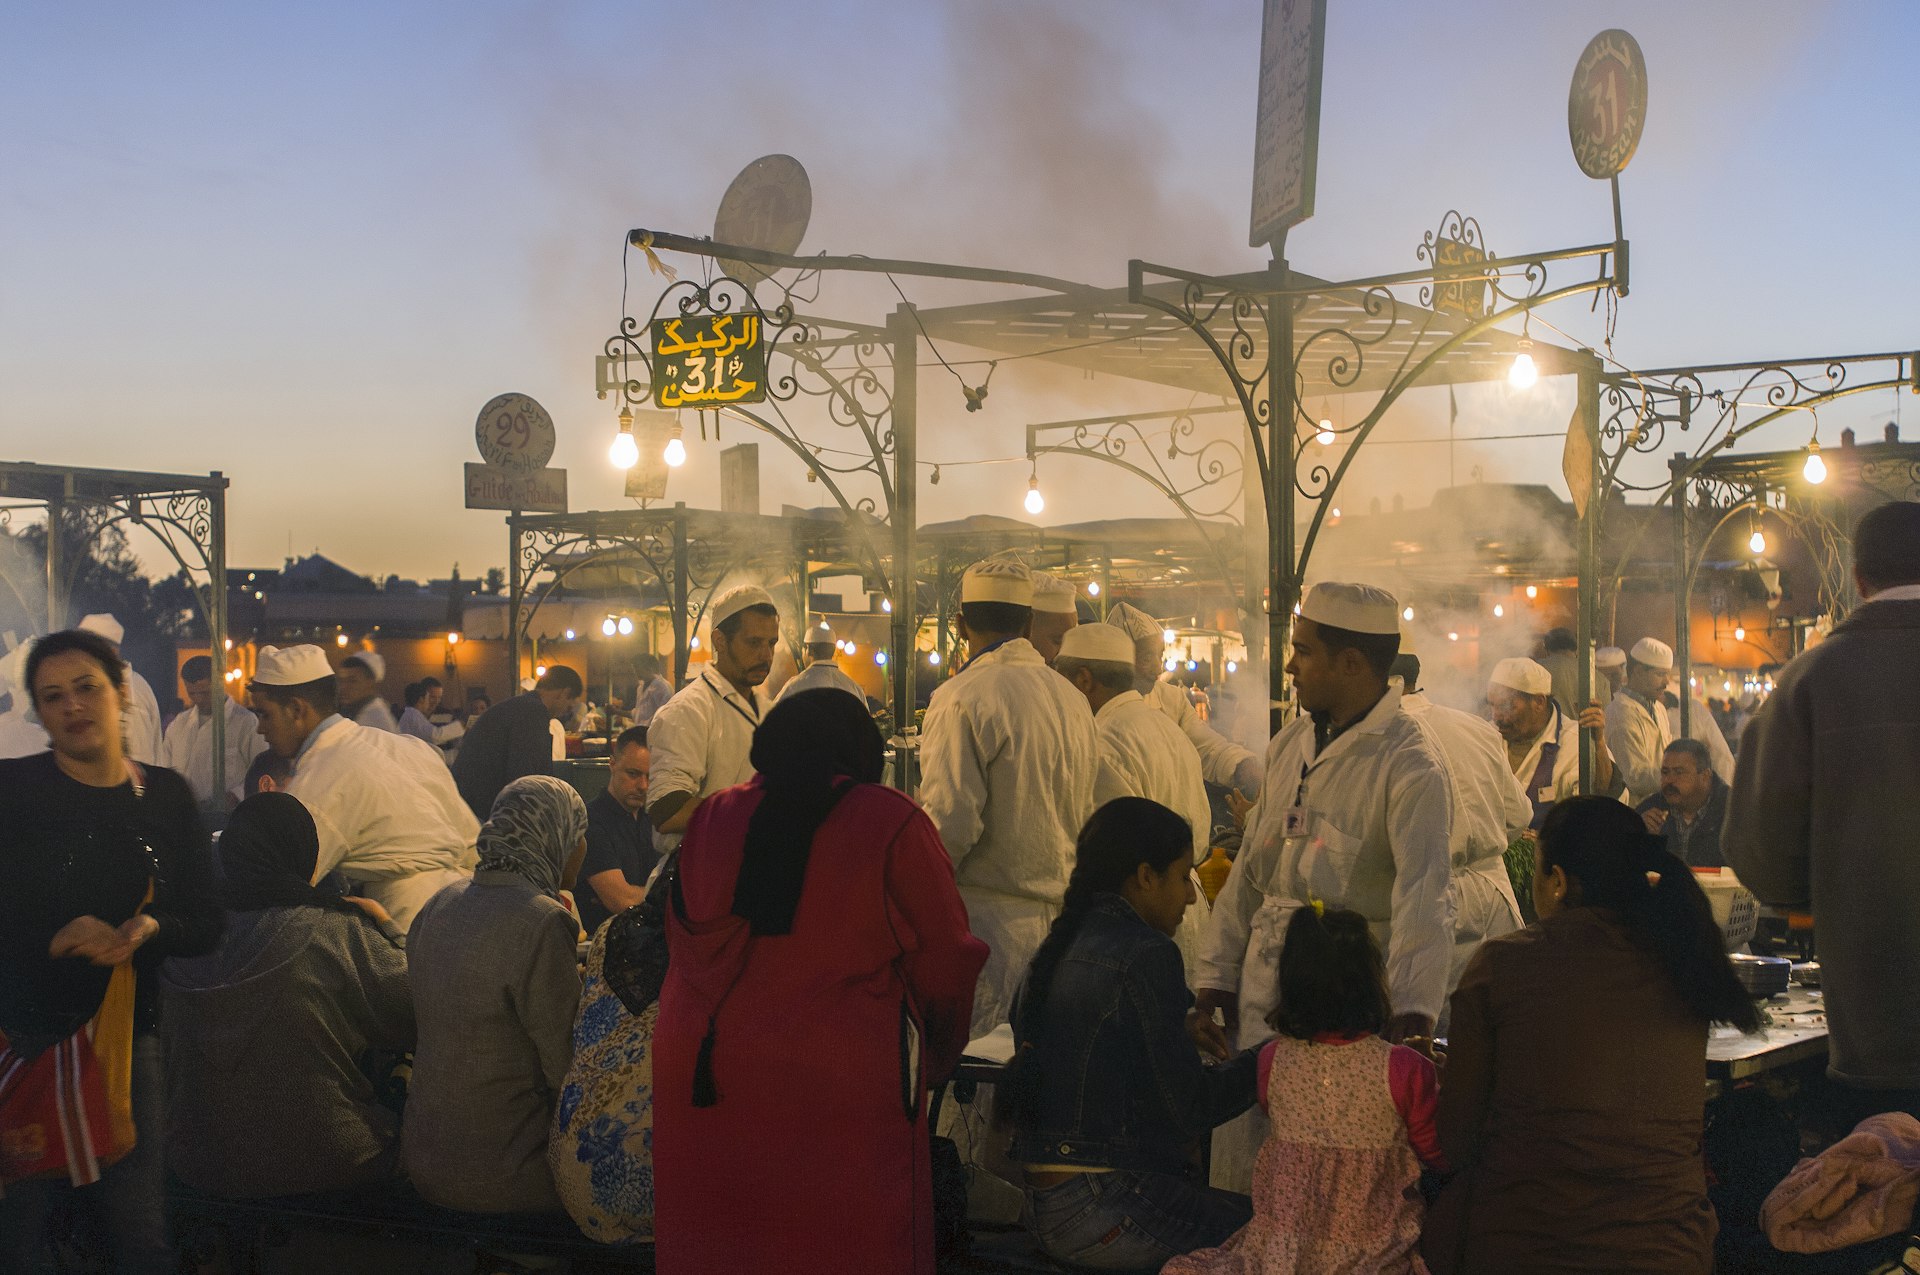 People eating at a stall in Djemaa El Fna square in Marrakesh